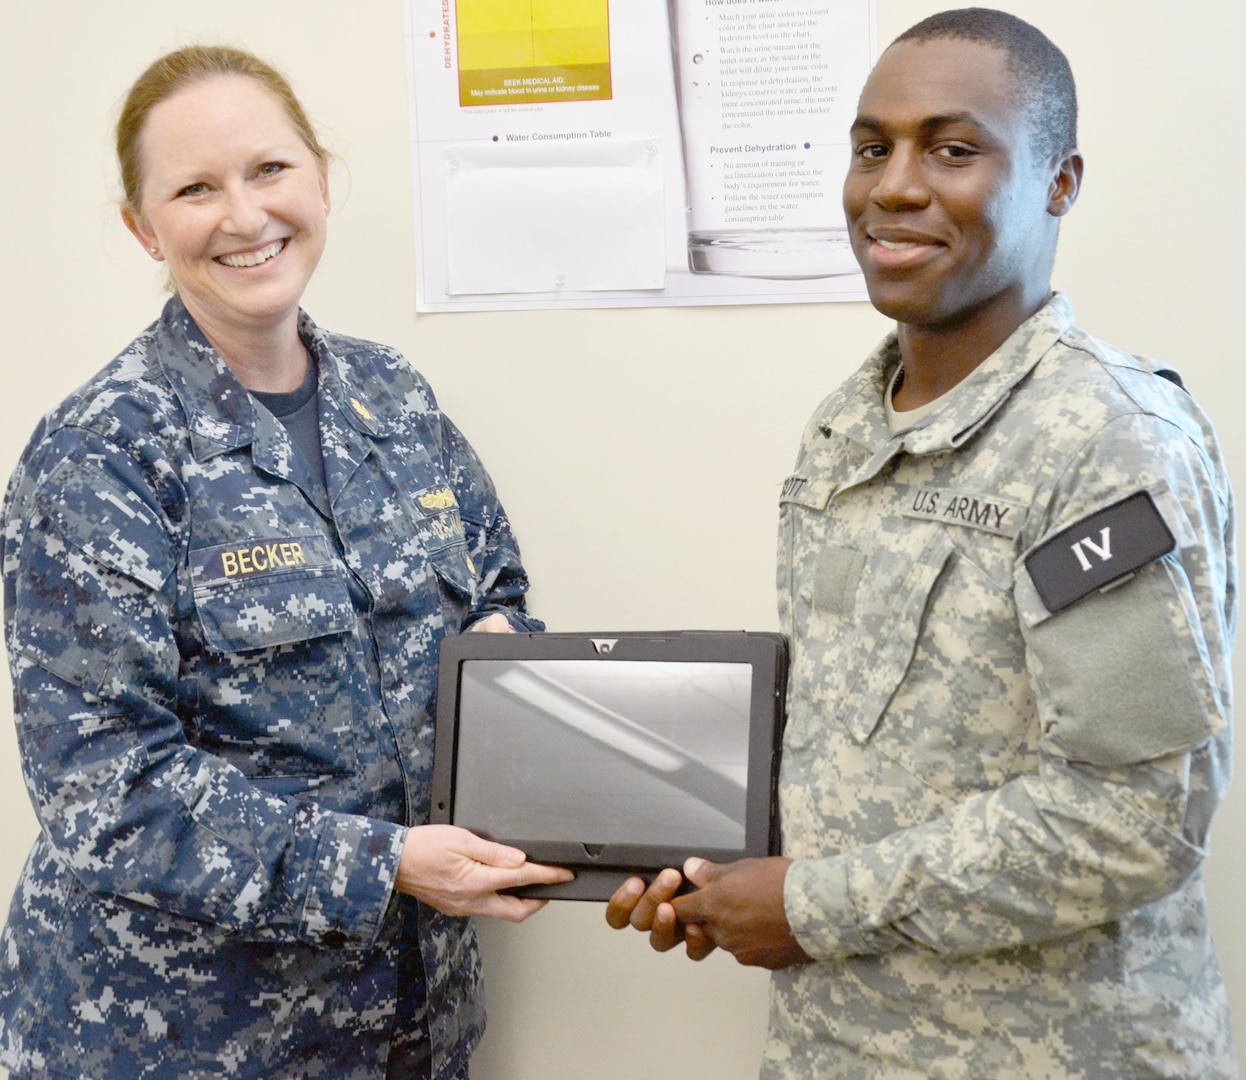 Navy Capt. Kathy Becker, Medical Education and Training Campus deputy commandant, presents a Slate tablet to Pvt. Darrion Scott, a student in the Public Health Specialist program, class 005-16. Scott’s class was one of two classes that was issued wireless laptops or Slates that are downloaded with course material as part of eMETC, a test pilot program to test the feasibility of using mobile devices to enhance learning ability. Students can use the devices to follow along with their instructors, take tests and study the material in their private time.